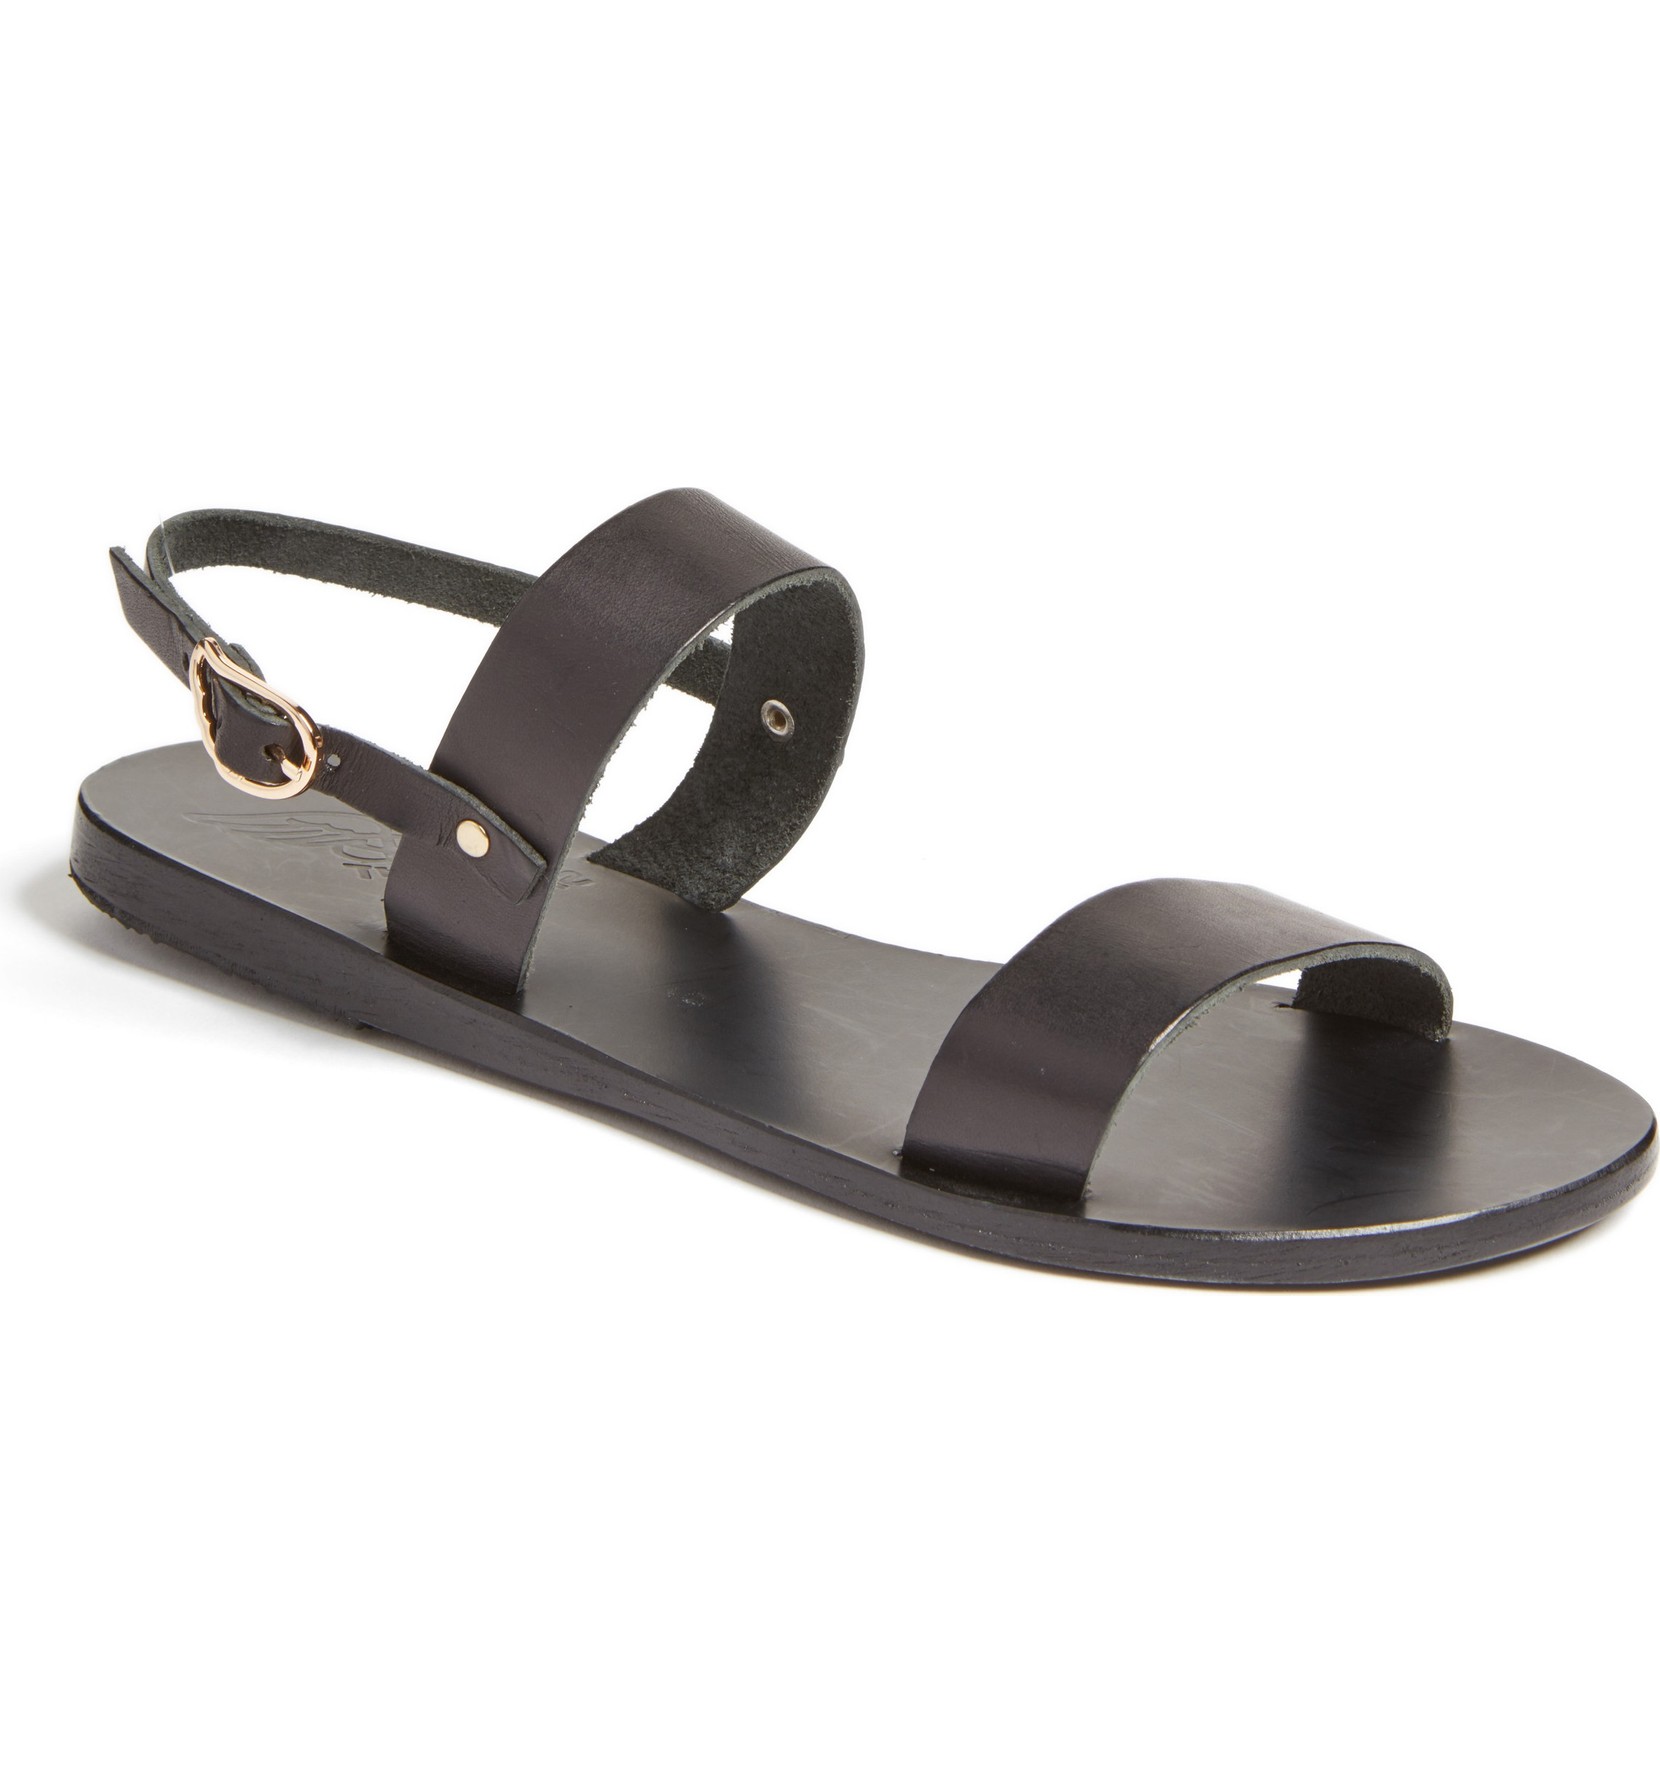 A pair of black double strap sandals